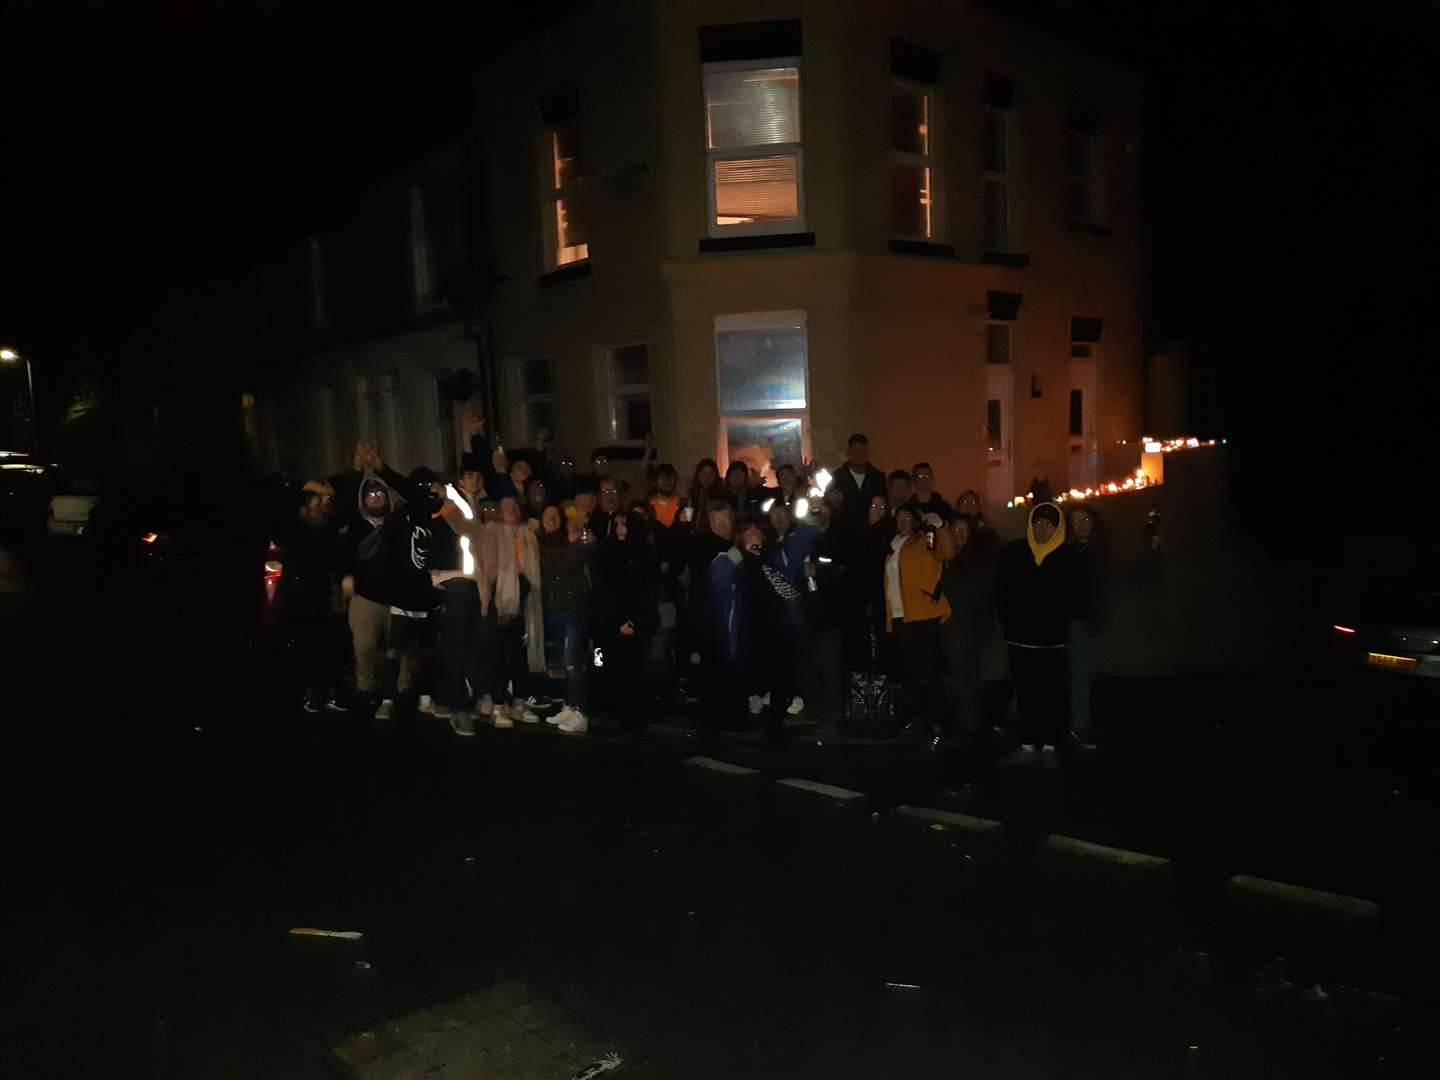 The vigil outside Mr Wilson's home within the first hour of New Year's Day.2020